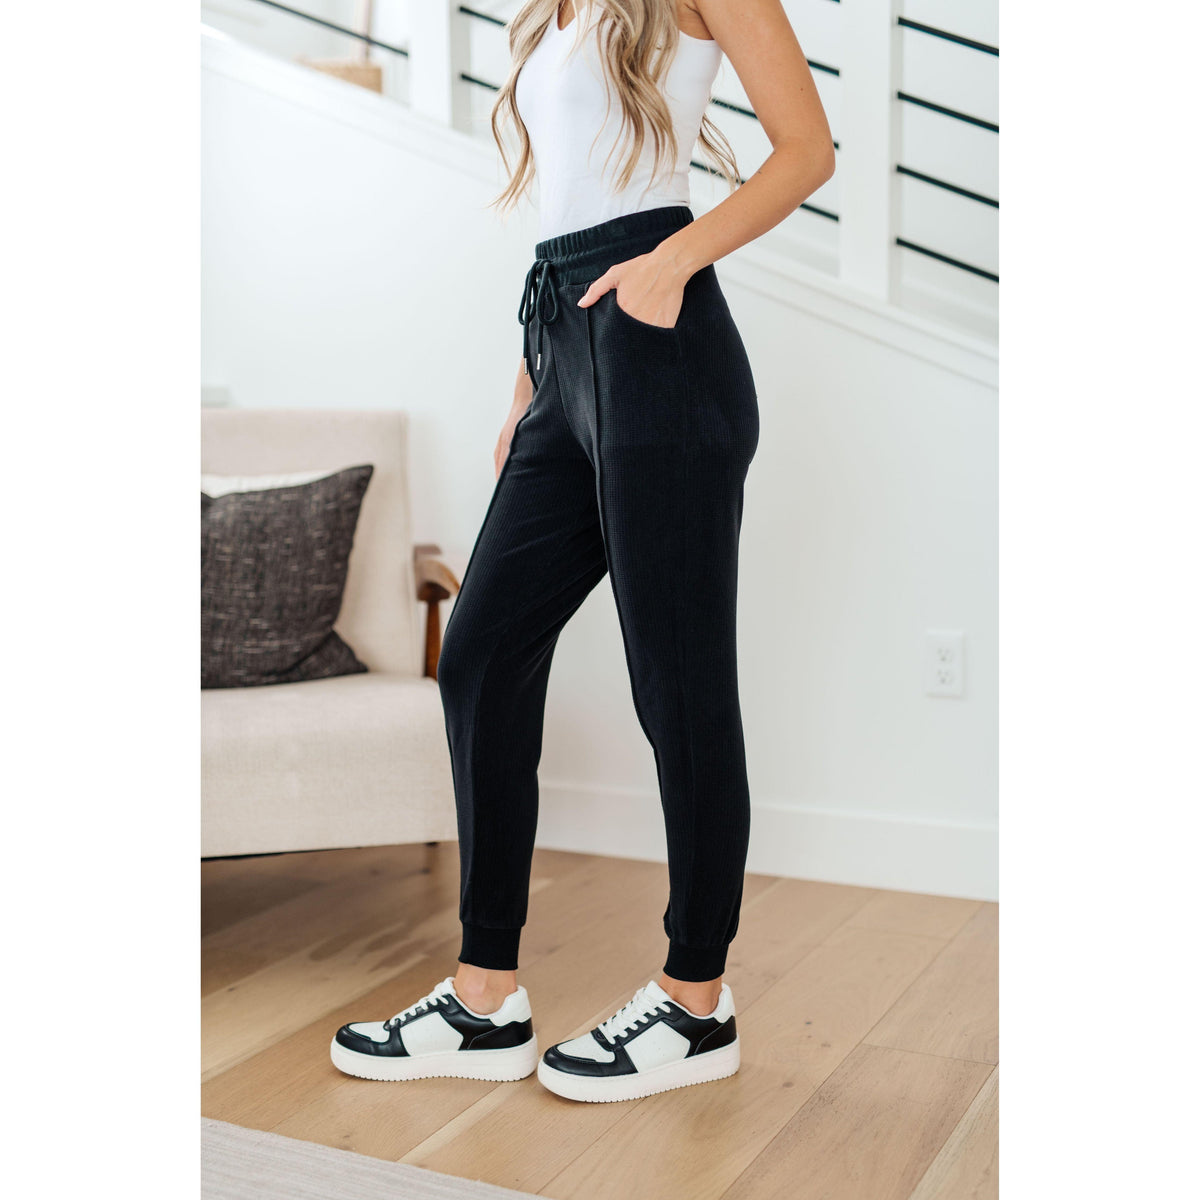 Women's Count With Me Jogger in Black - becauseofadi